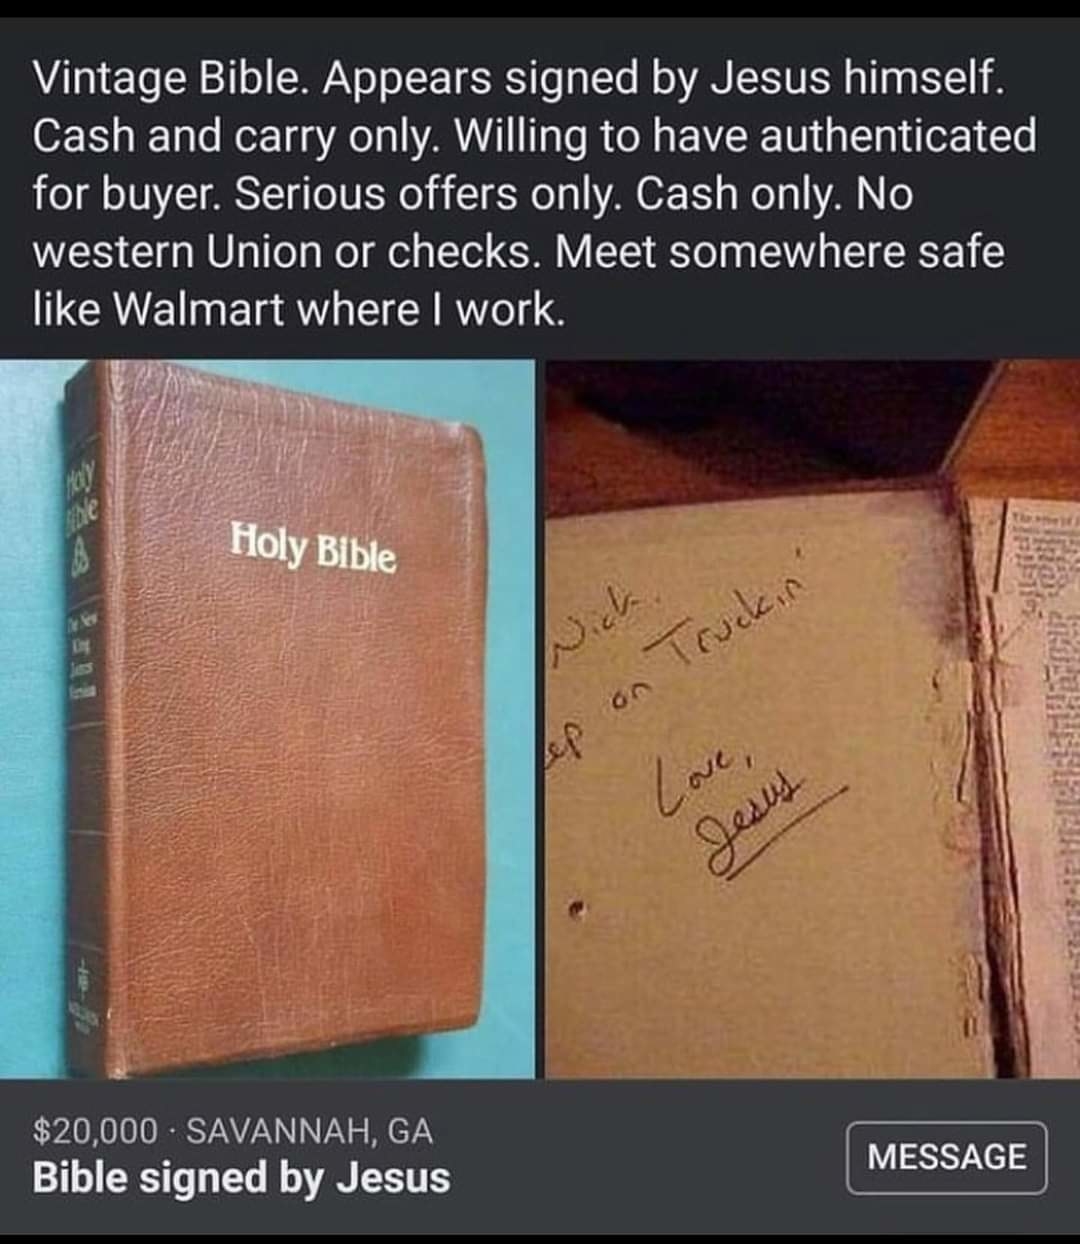 Bible for sale for $20,000 in Savannah, Georgia, signed by Jesus with &quot;Nick, Keep on truckin&#x27;, love, Jesus&quot;